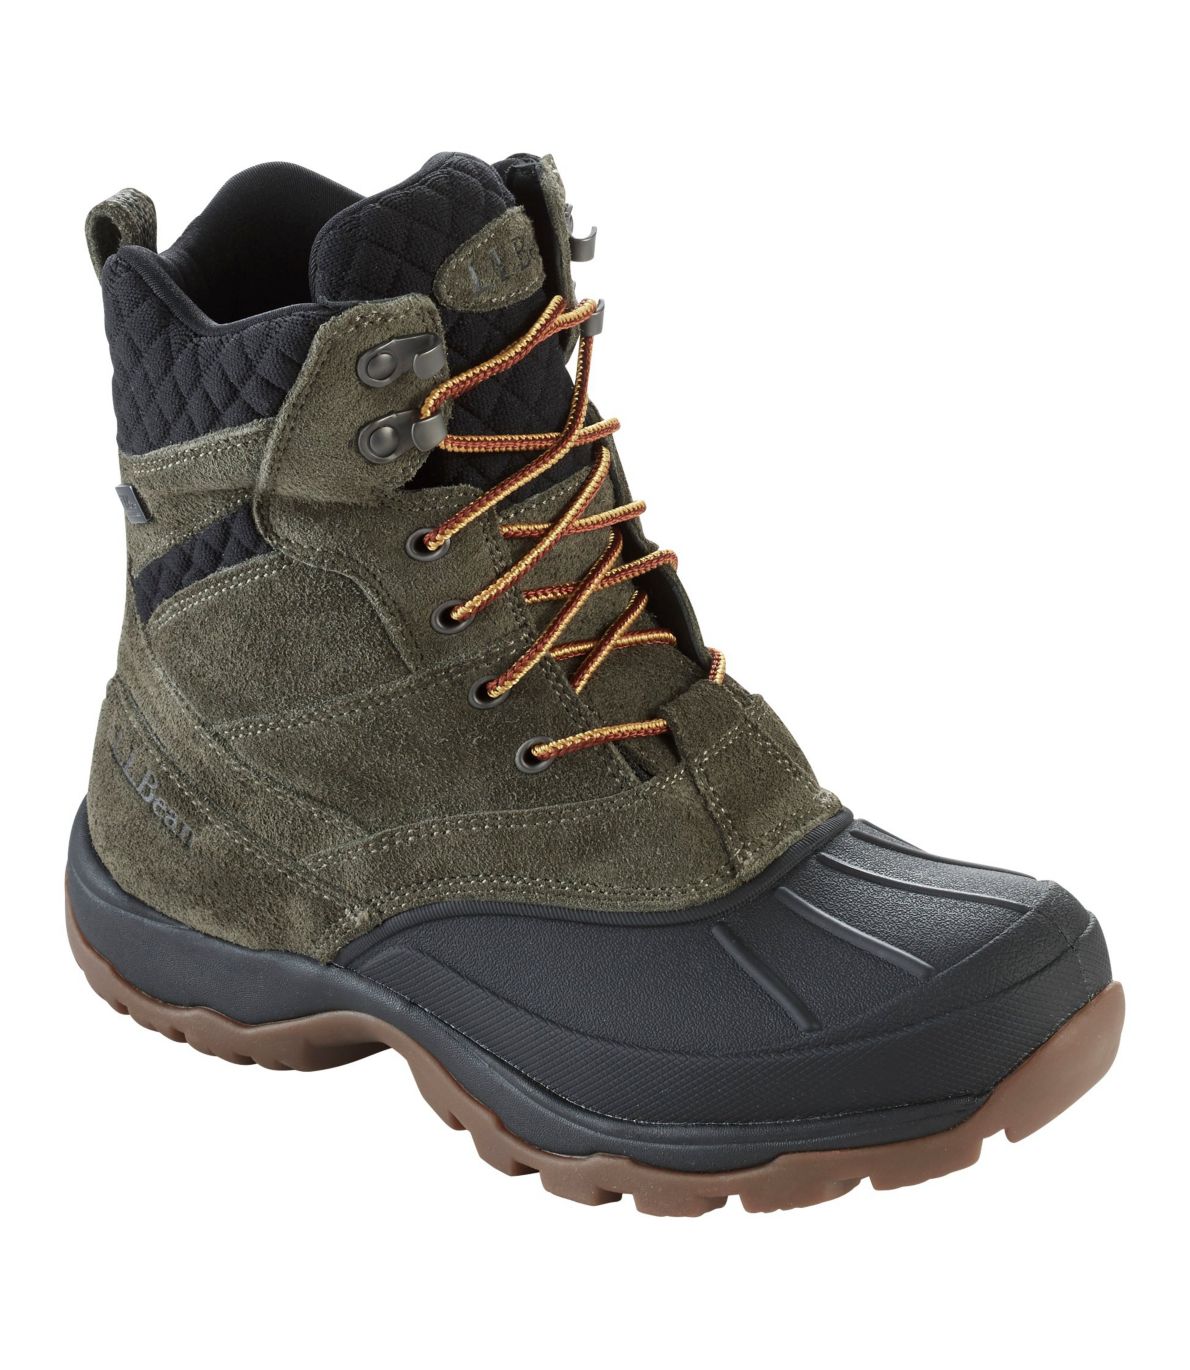 Men's Storm Chaser Suede Boots, Lace-Up at L.L. Bean